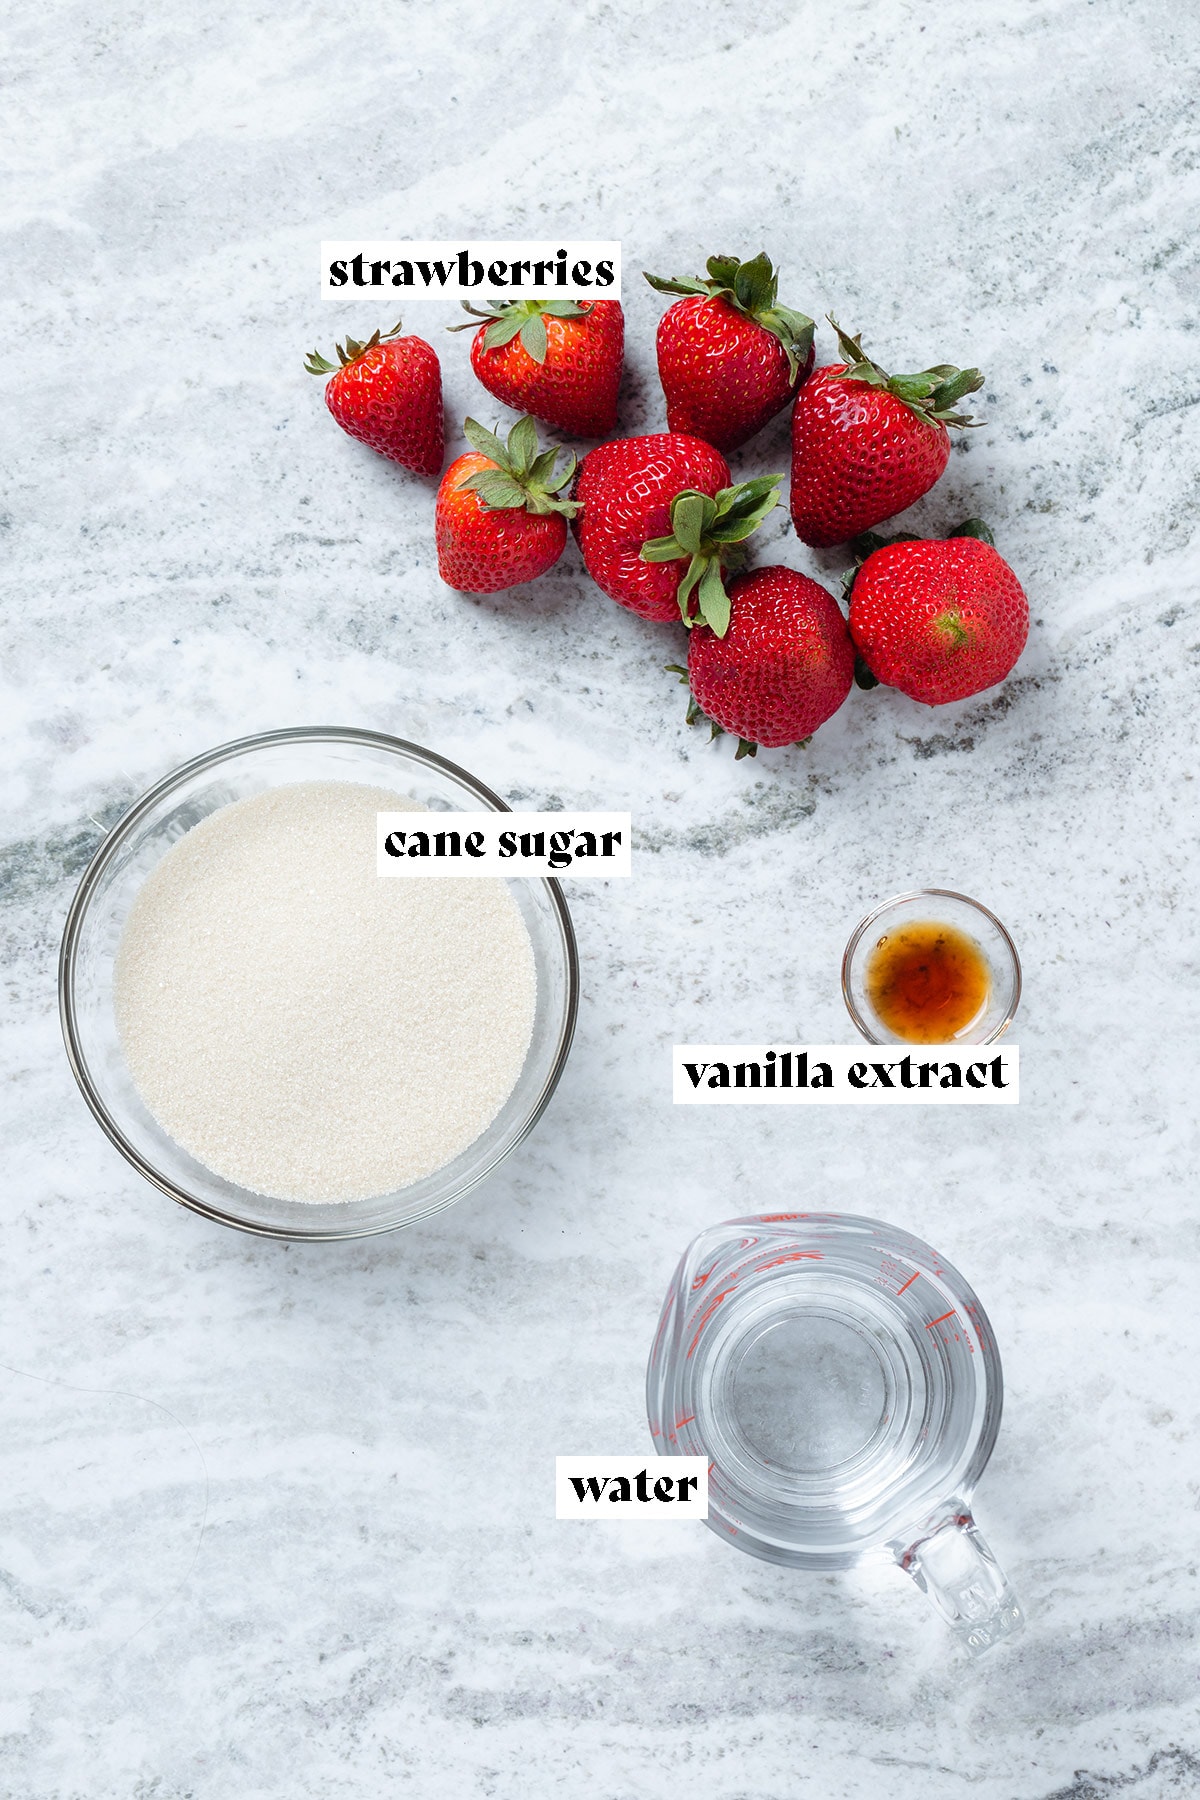 Strawberries, cane sugar, agave, and water in a glass measuring cup laid out on a grey stone background.